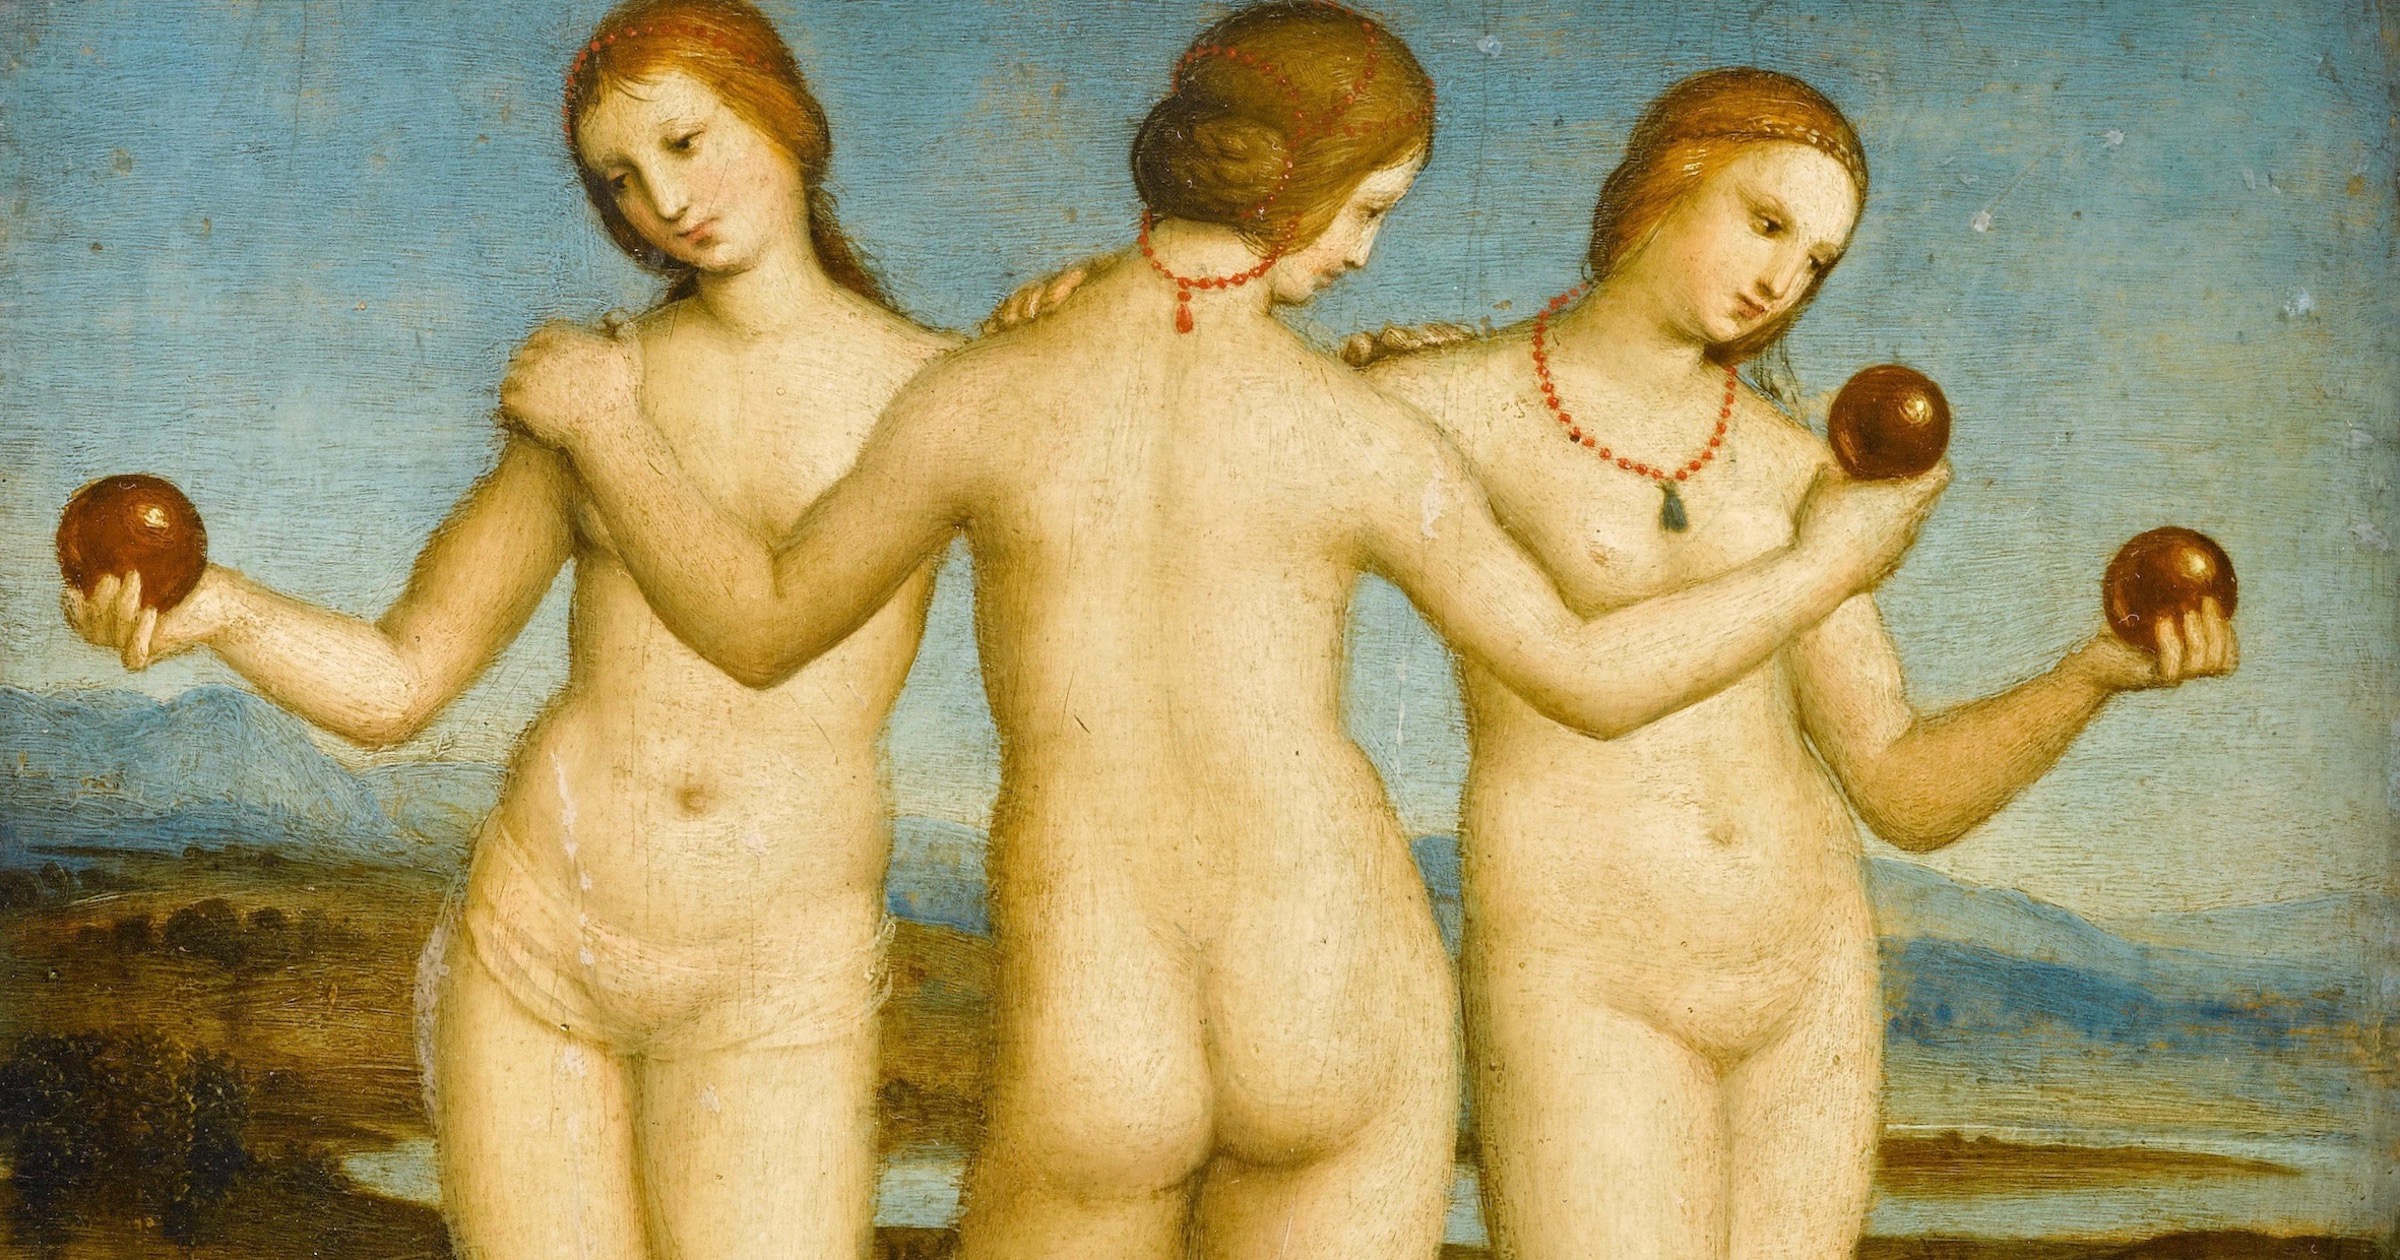 The Three Graces, by Raphael